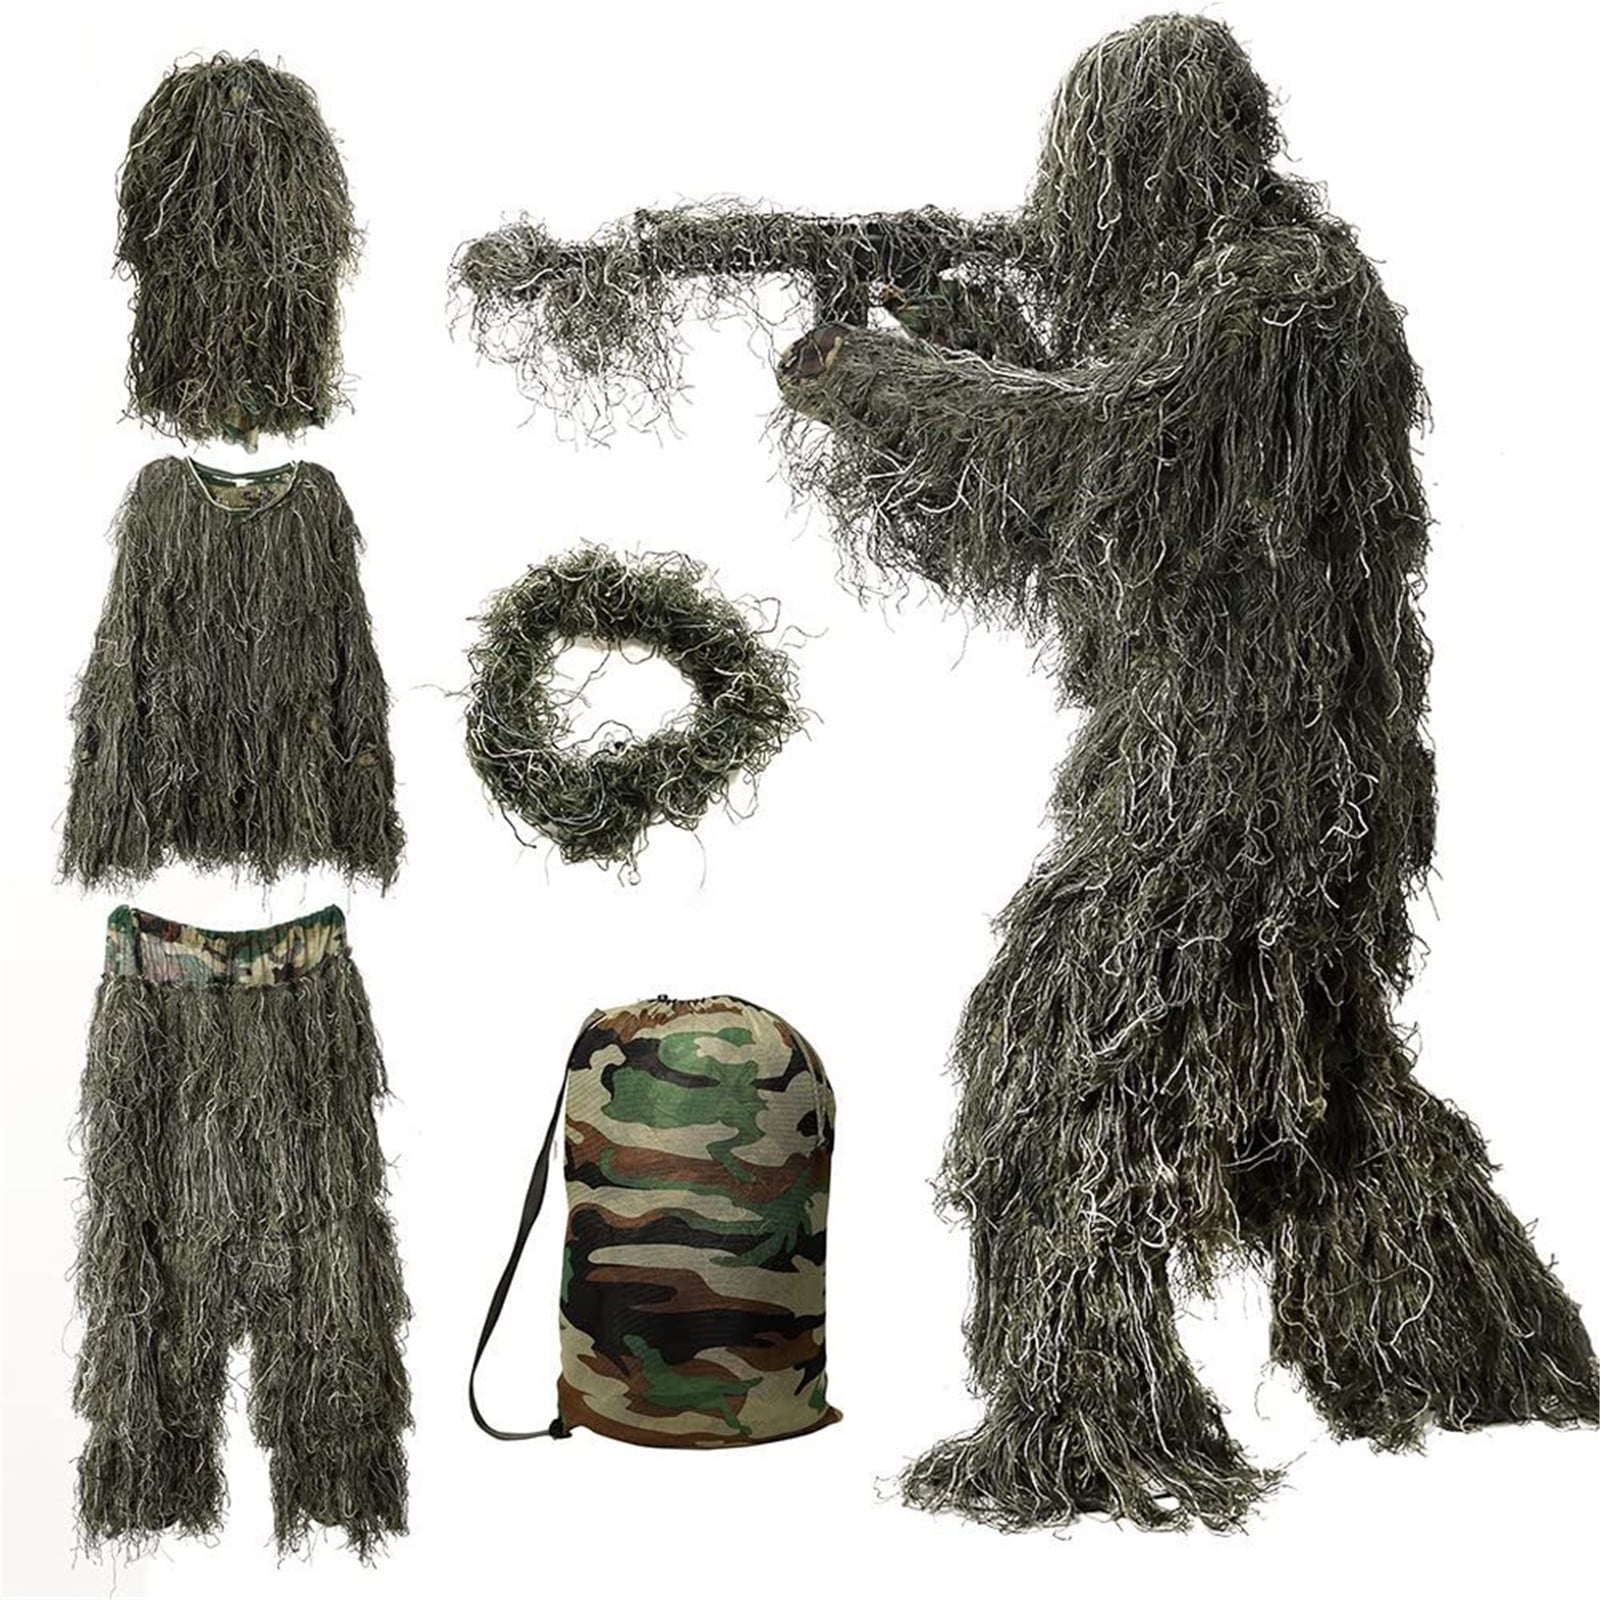 Mens Camouflage Hunting And Camping Jacket And Pants Set Waterproof  Sharkskin Ghillie Suit With Soft Fleece Lining From Xiaoyanyes, $50.86